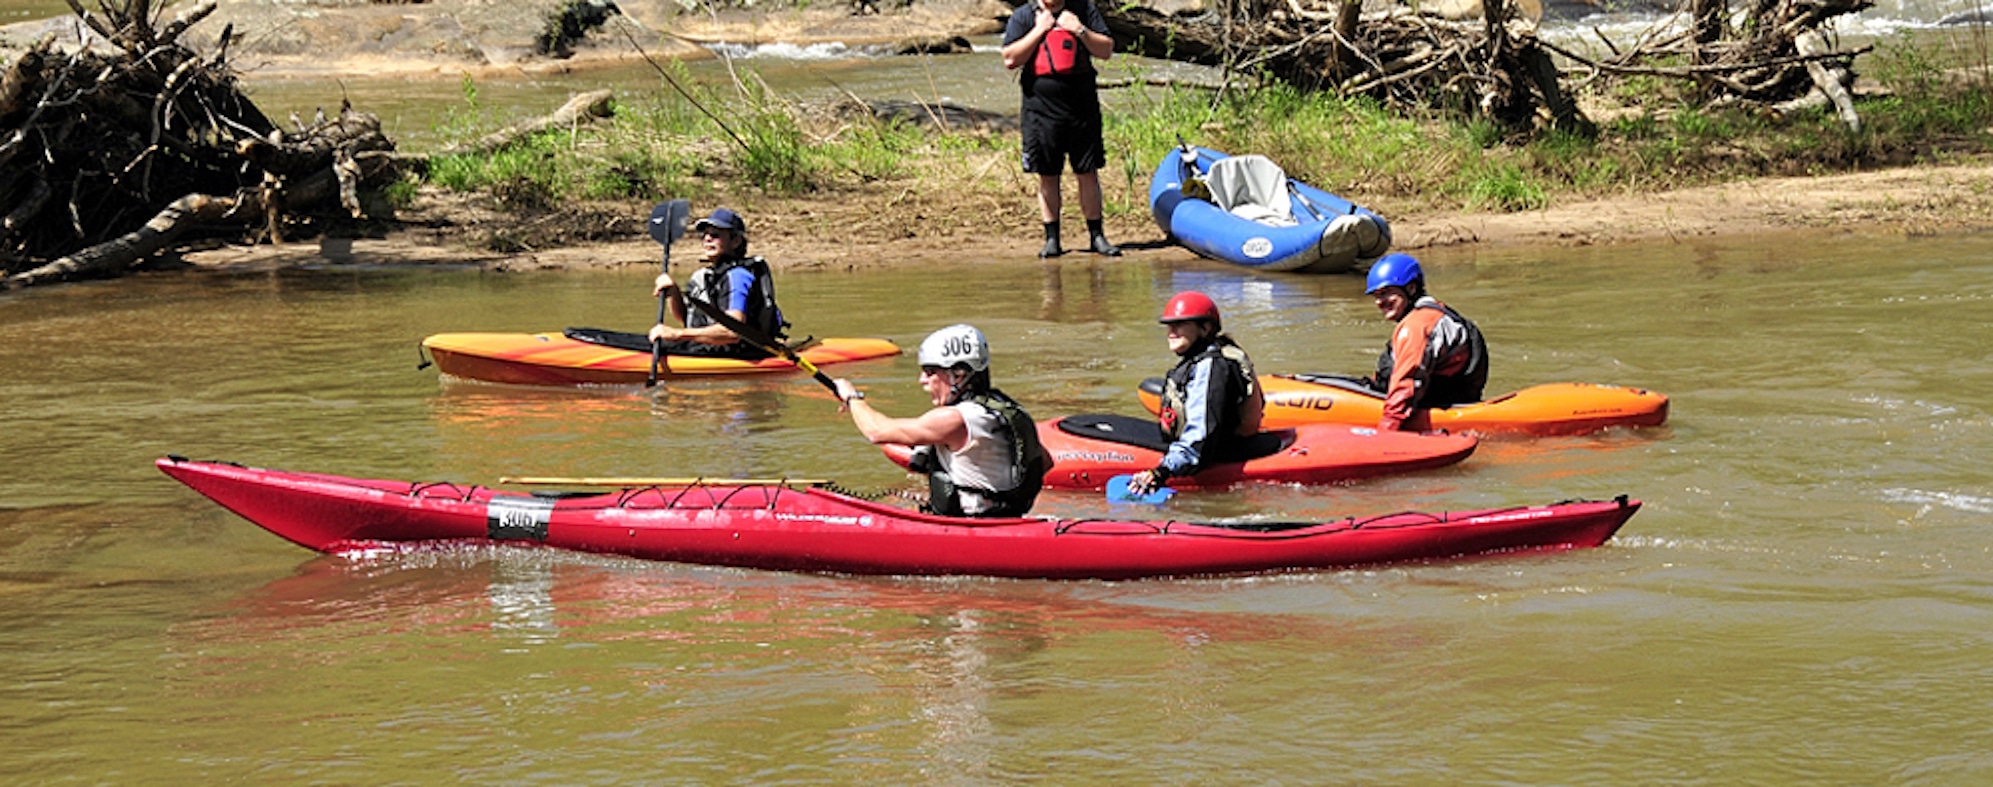 Discover Spartanburg County’s Water Fun at April Event